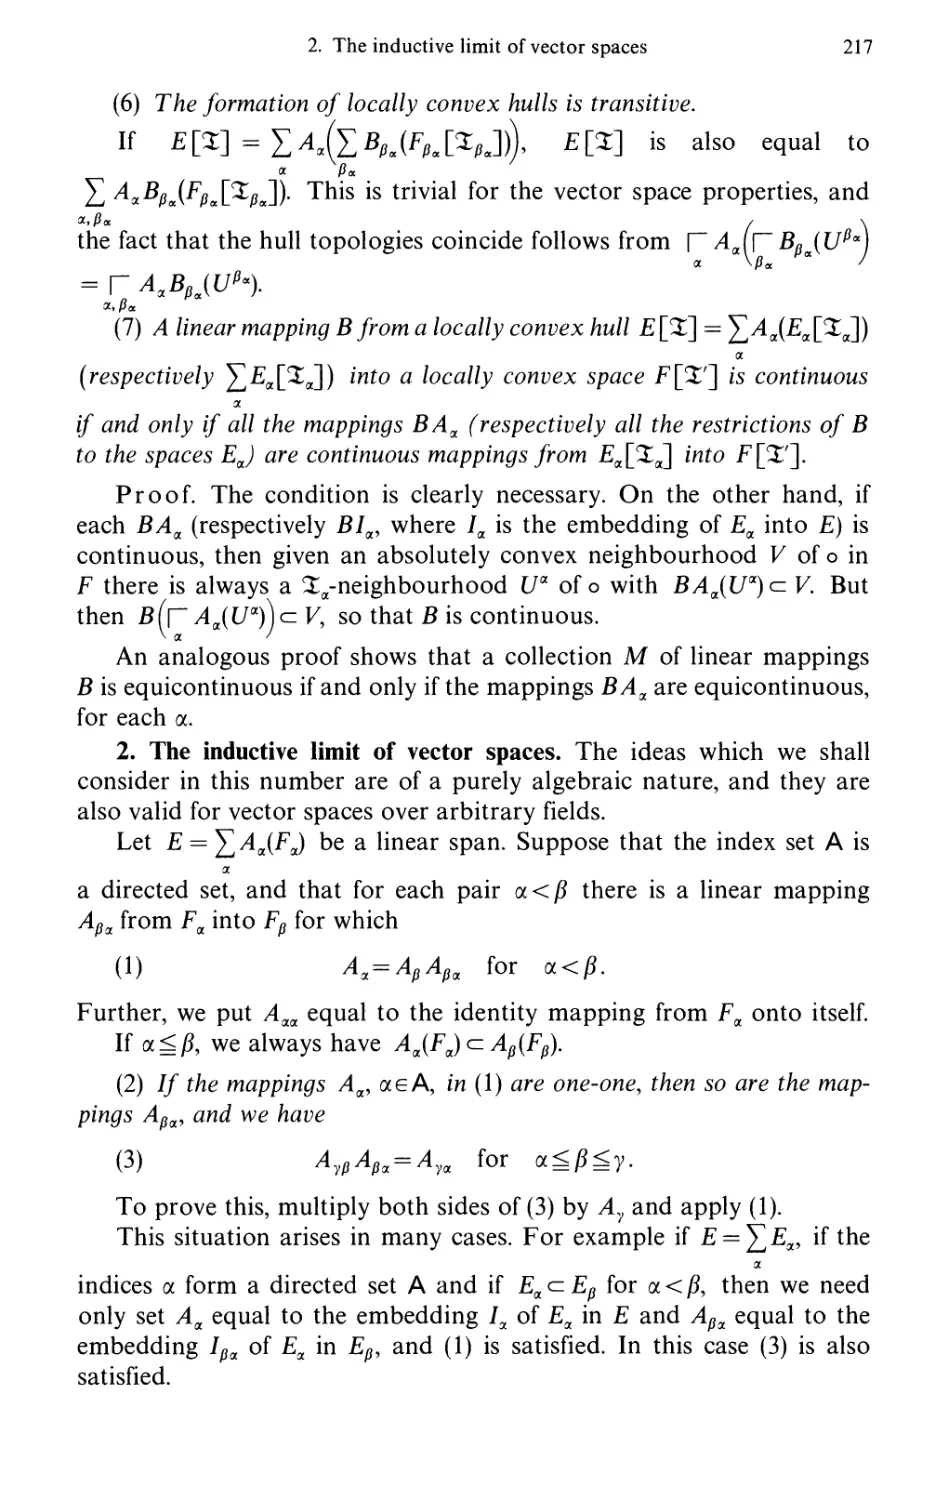 2. The inductive limit of vector spaces